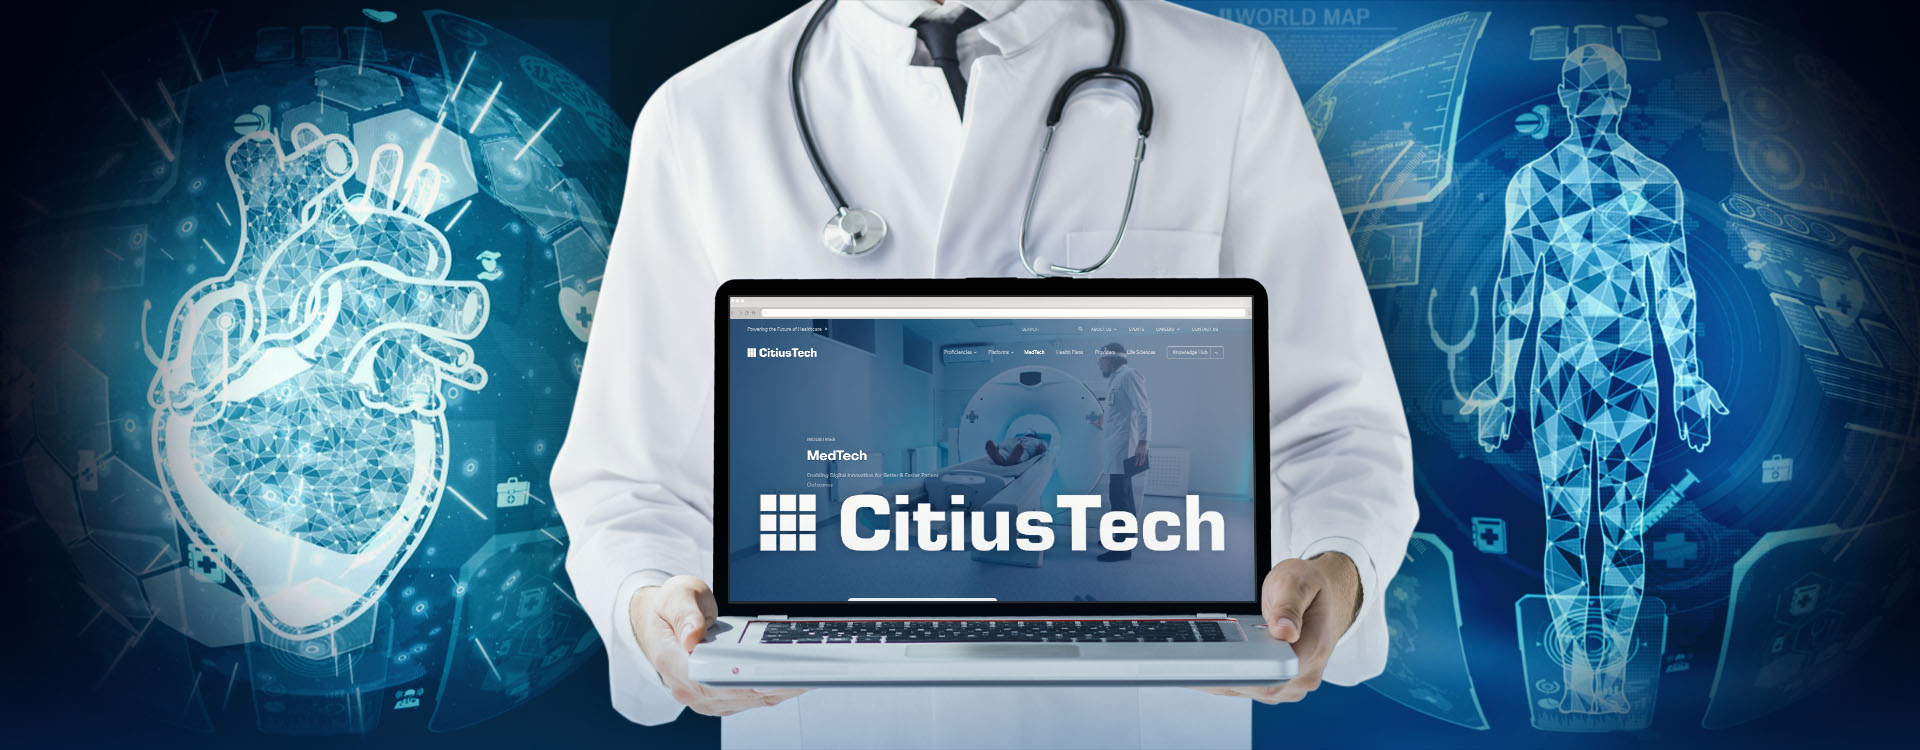 CitiusTech: Becoming a Holistic Platform for Healthcare Technology